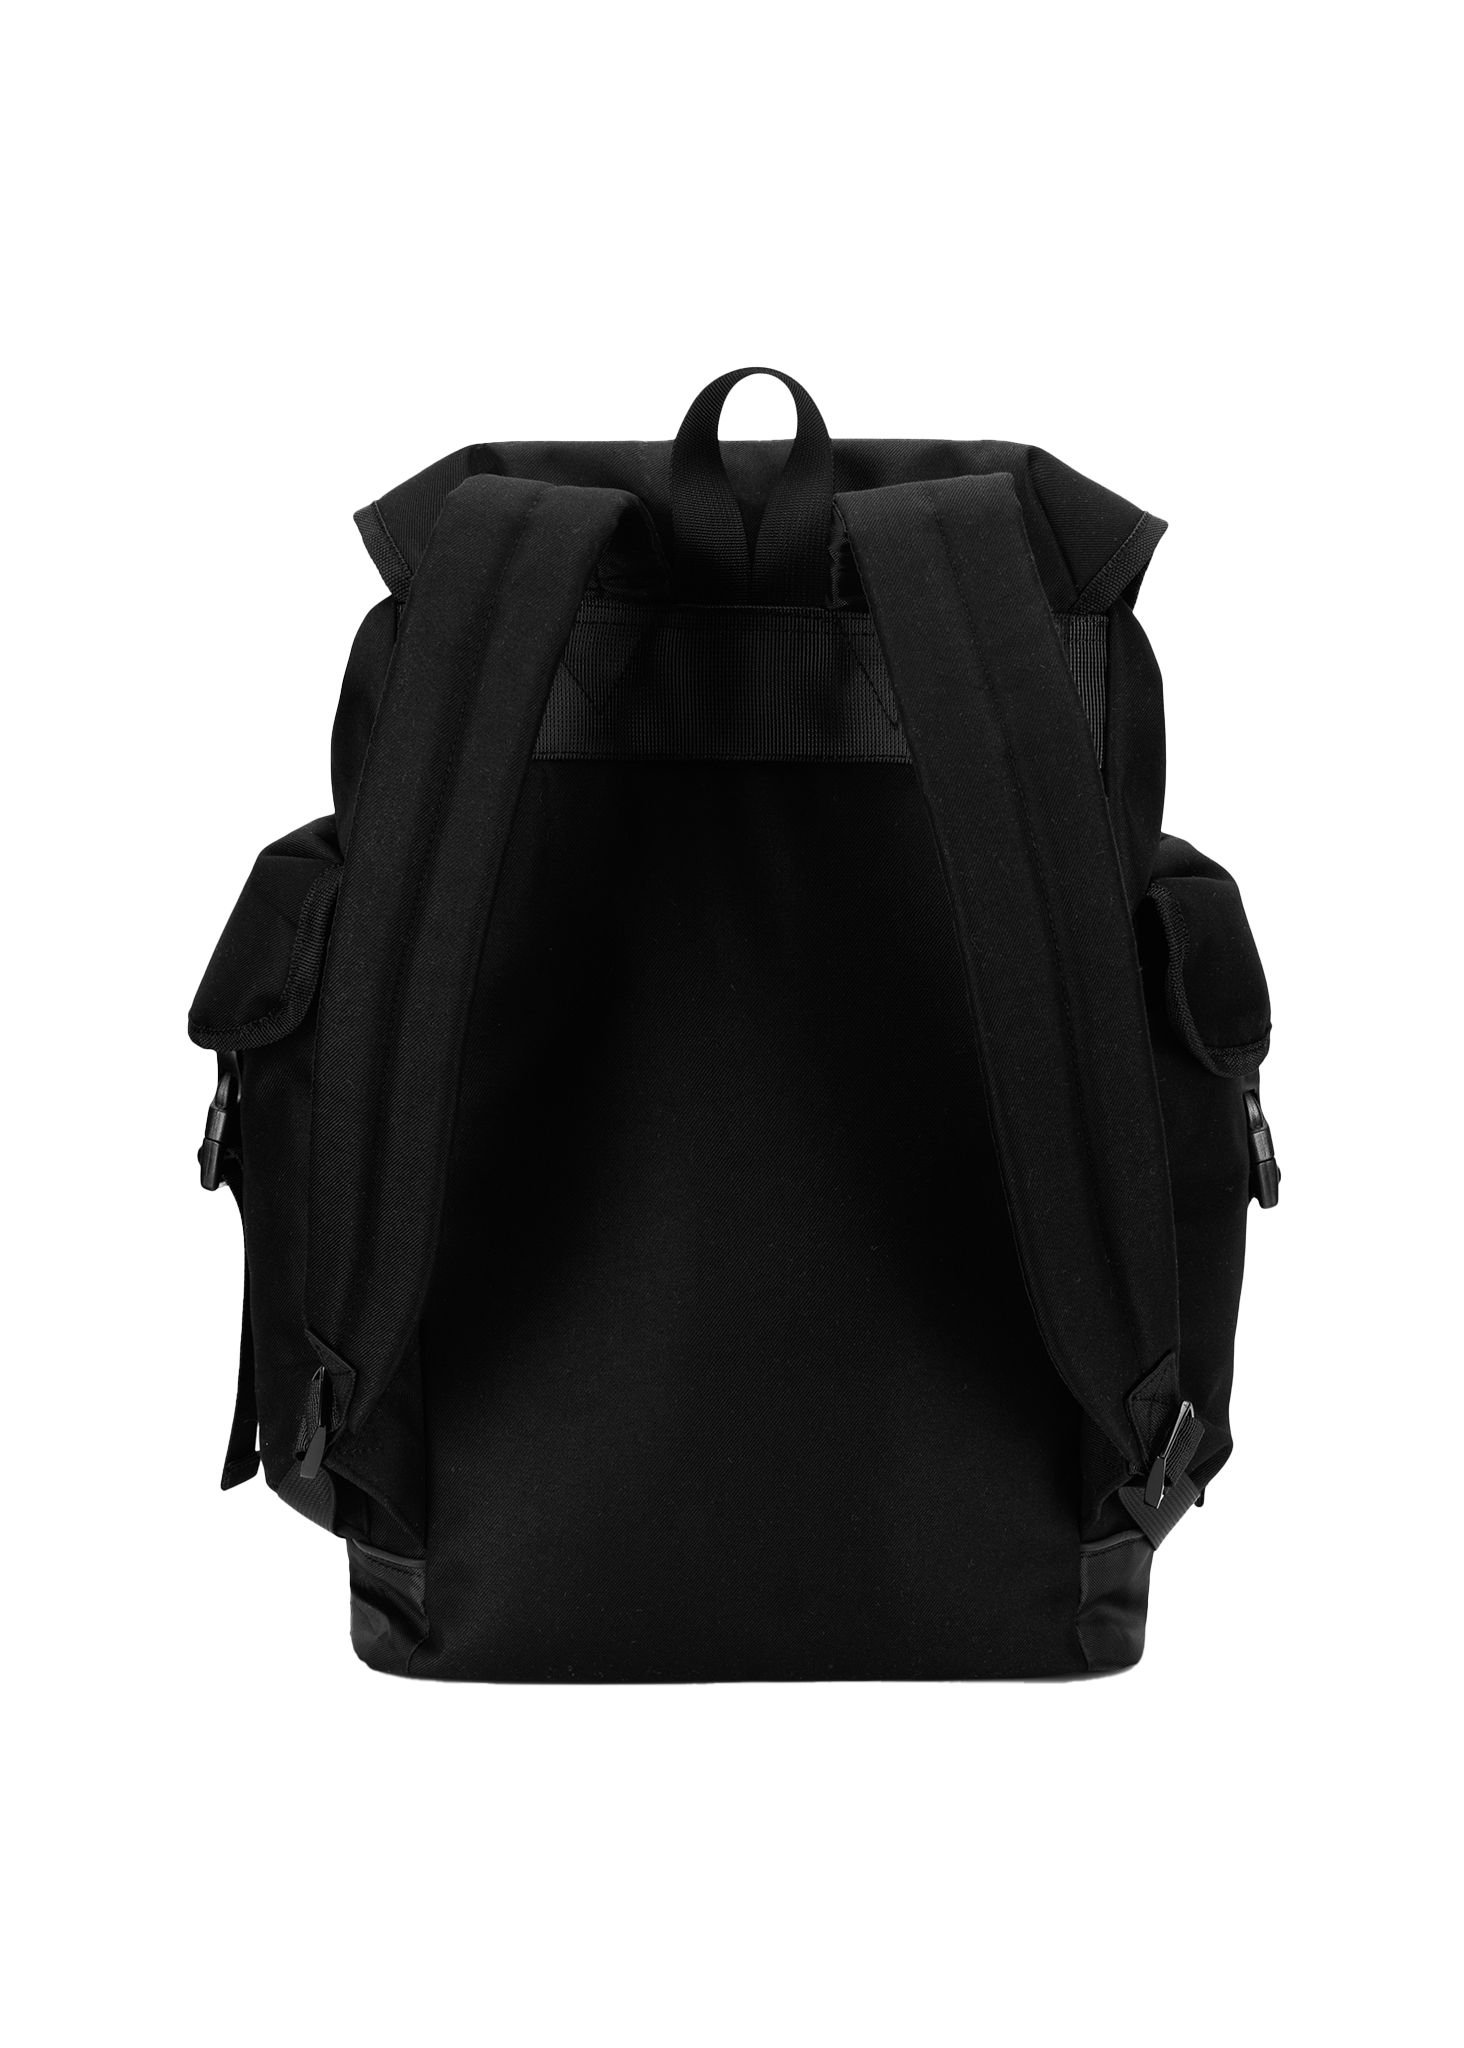 BRGN by Lunde & Gaundal Frost Backpack Accessories 095 New Black